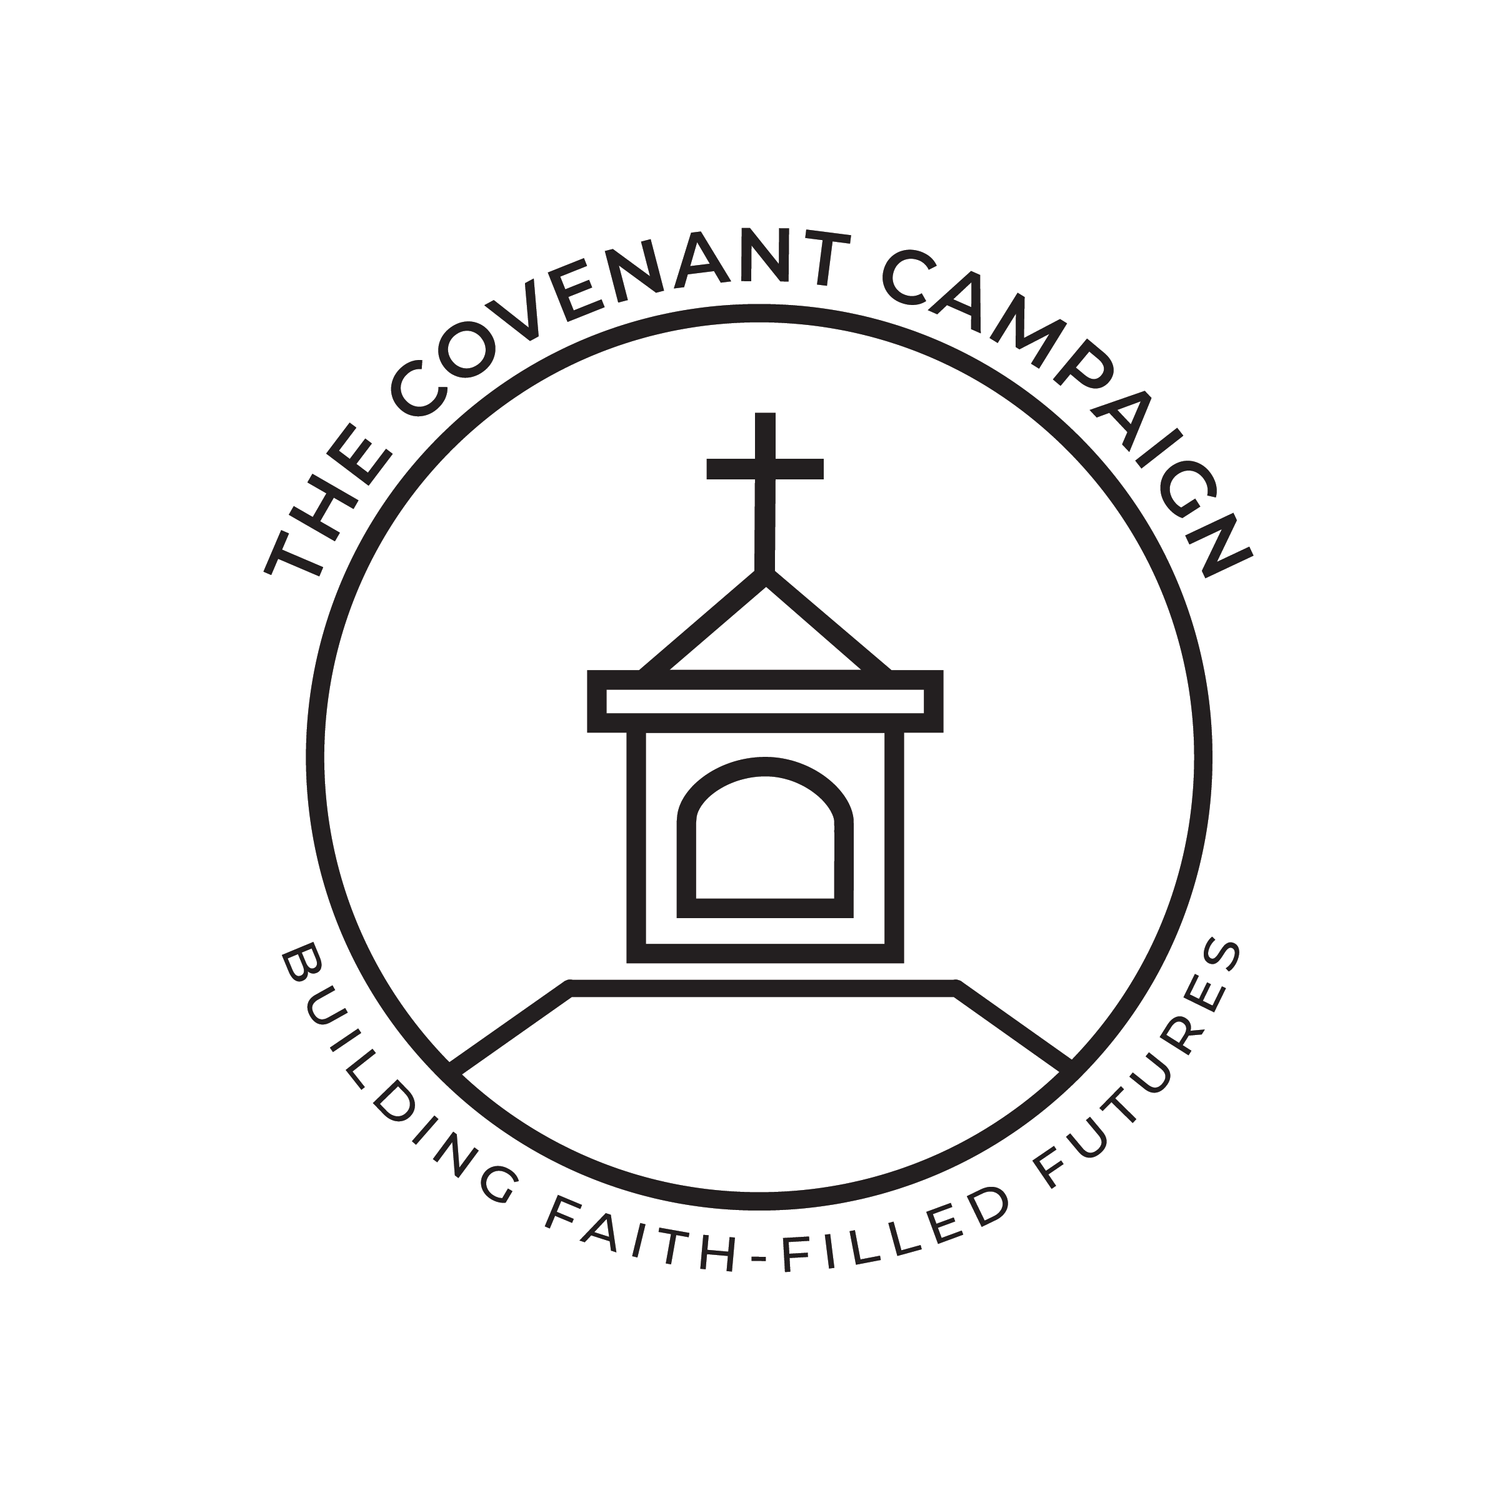 The Covenant Campaign